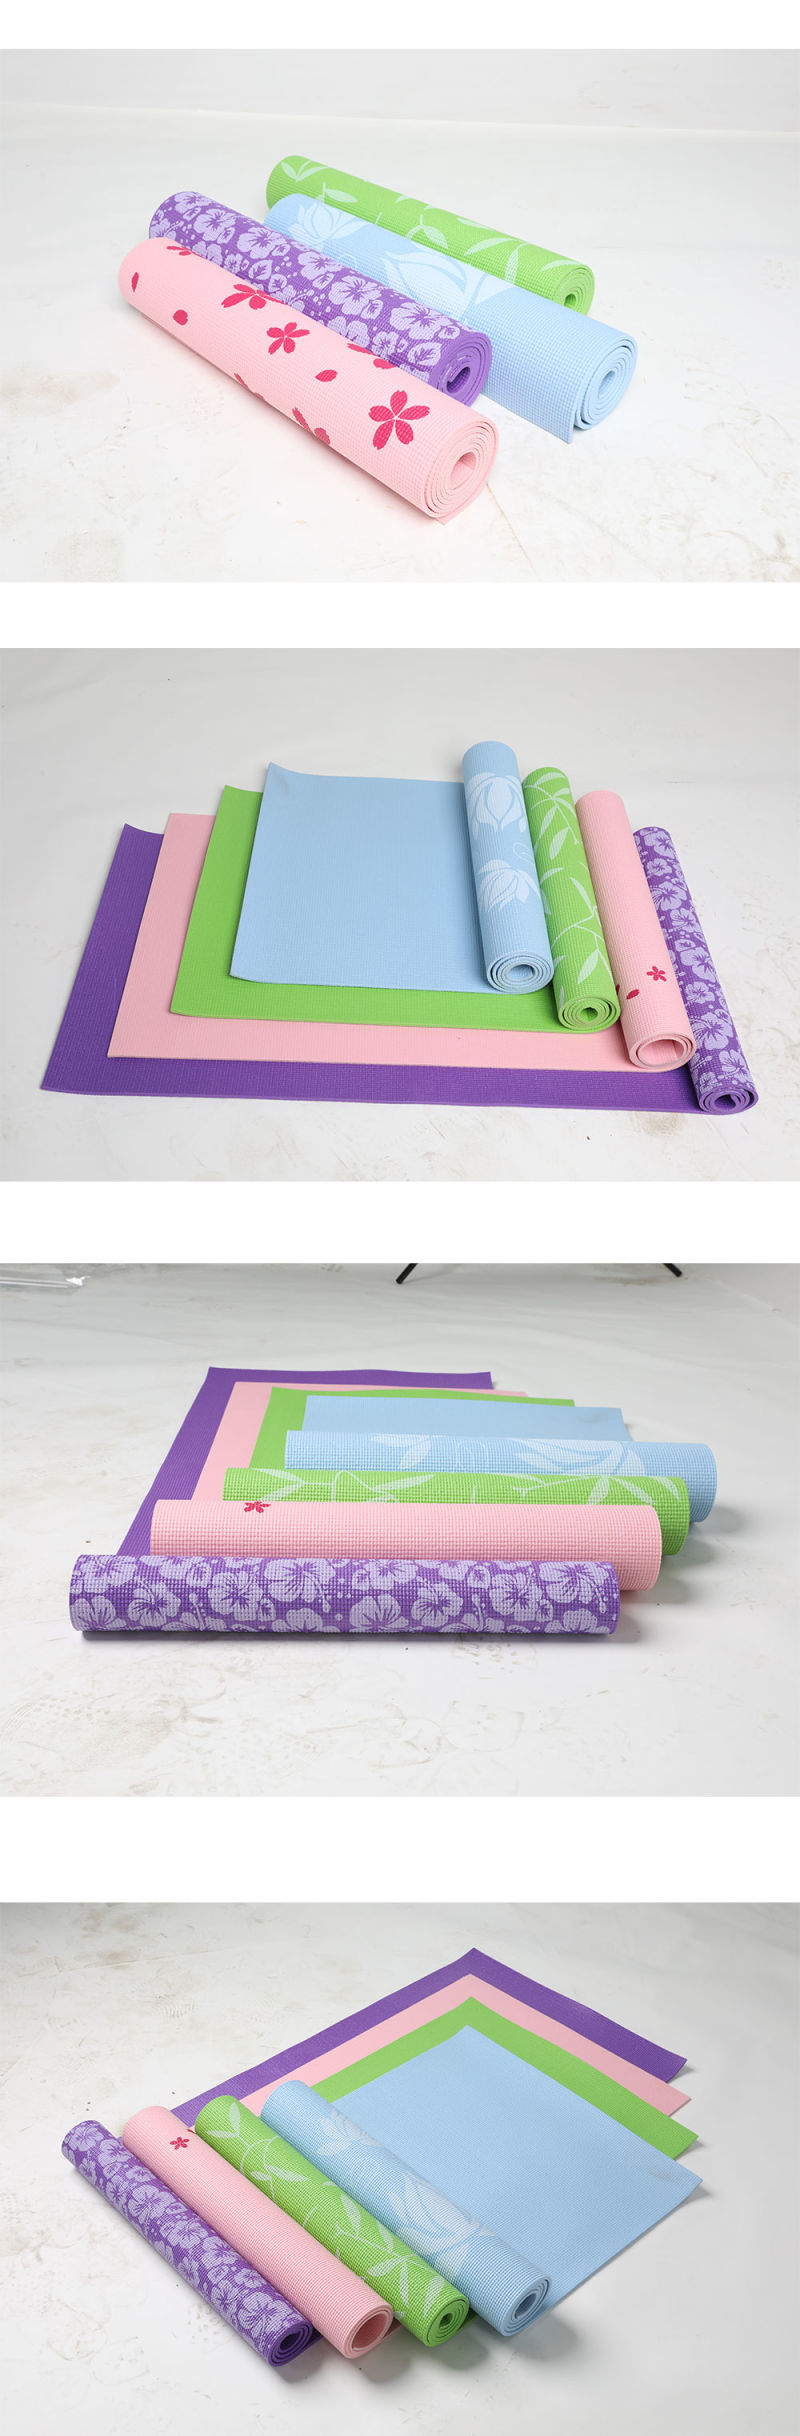 Yoga Mat for Yoga, Pilates and Floor Exercises